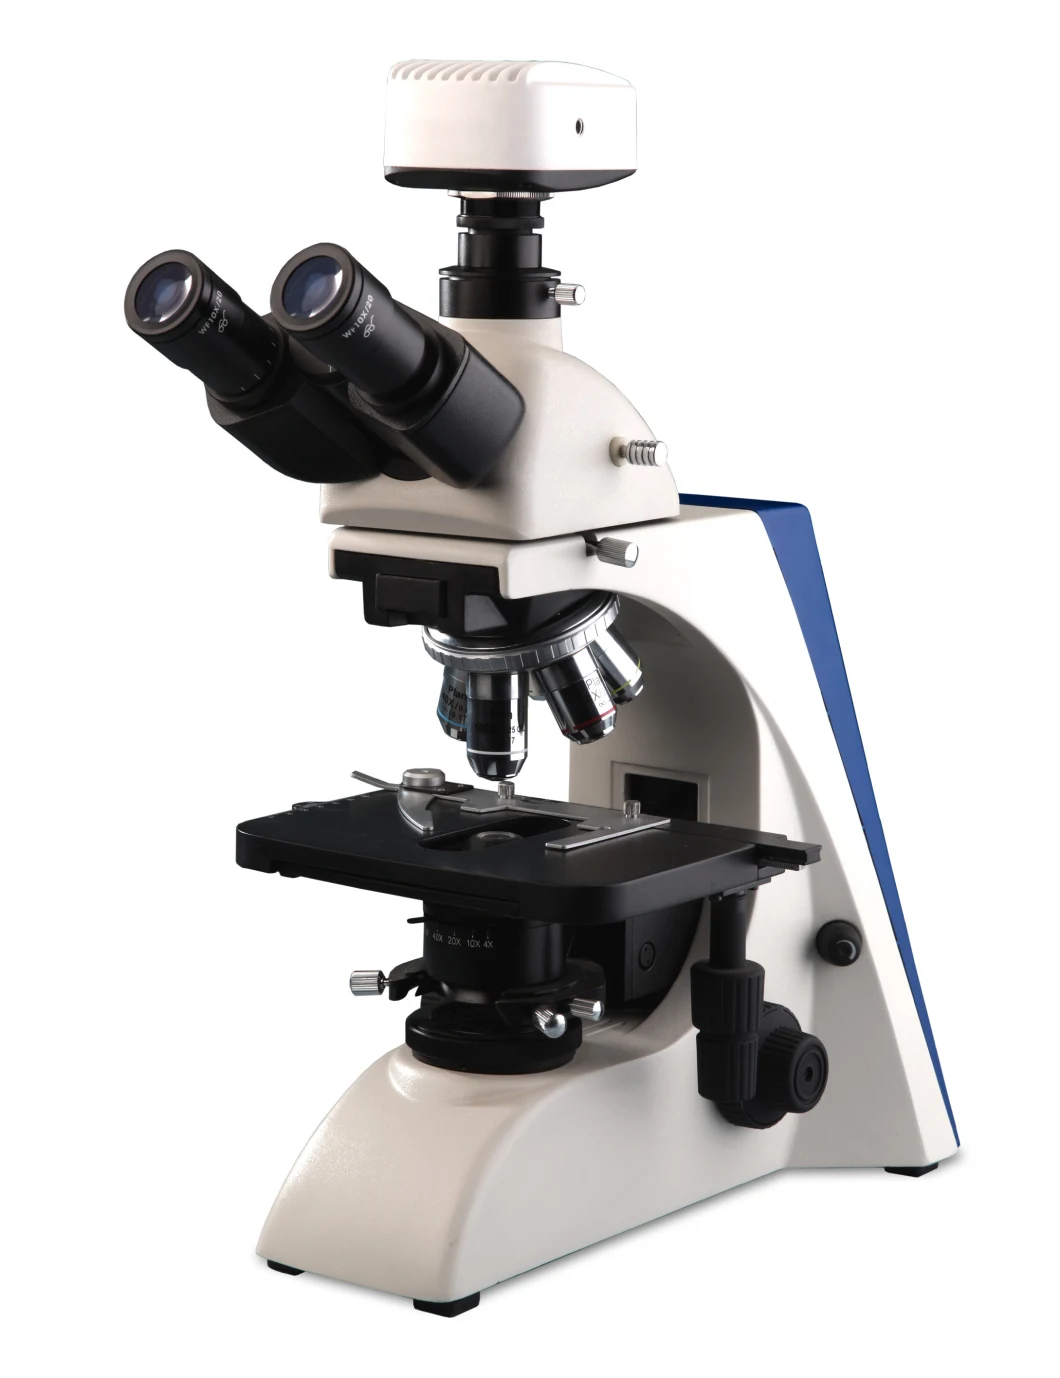 China Top Selling Products Biological Microscope Price